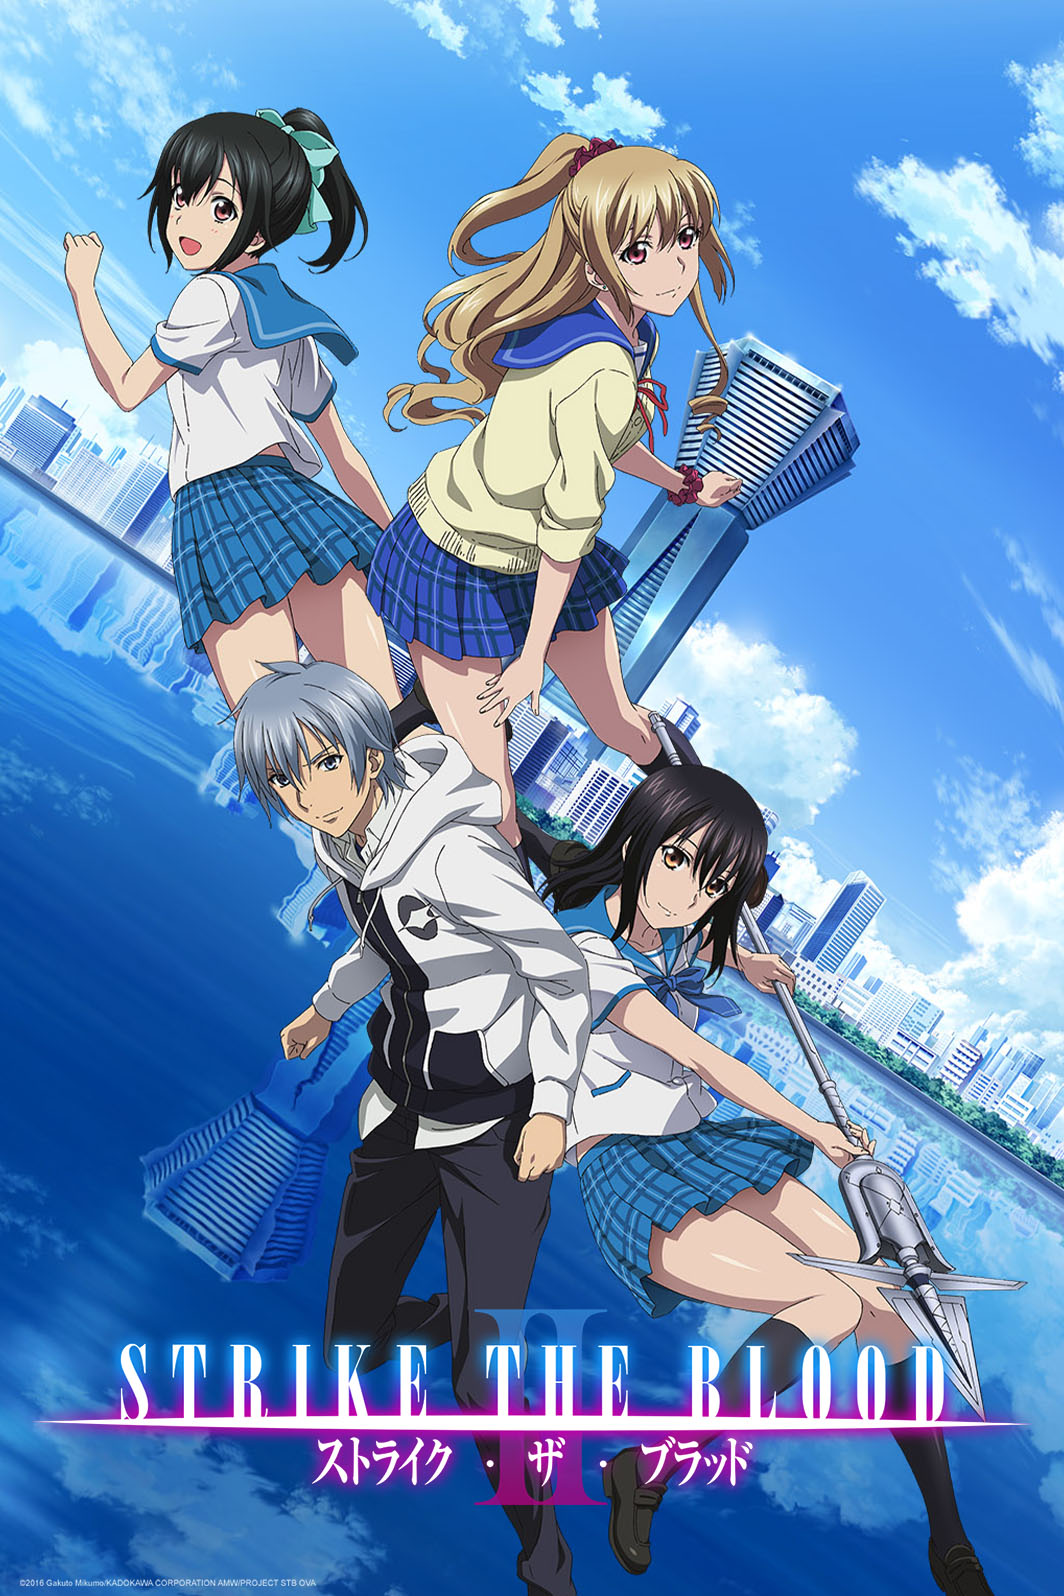 Crunchyroll expands its catalog with the second season of Strike the